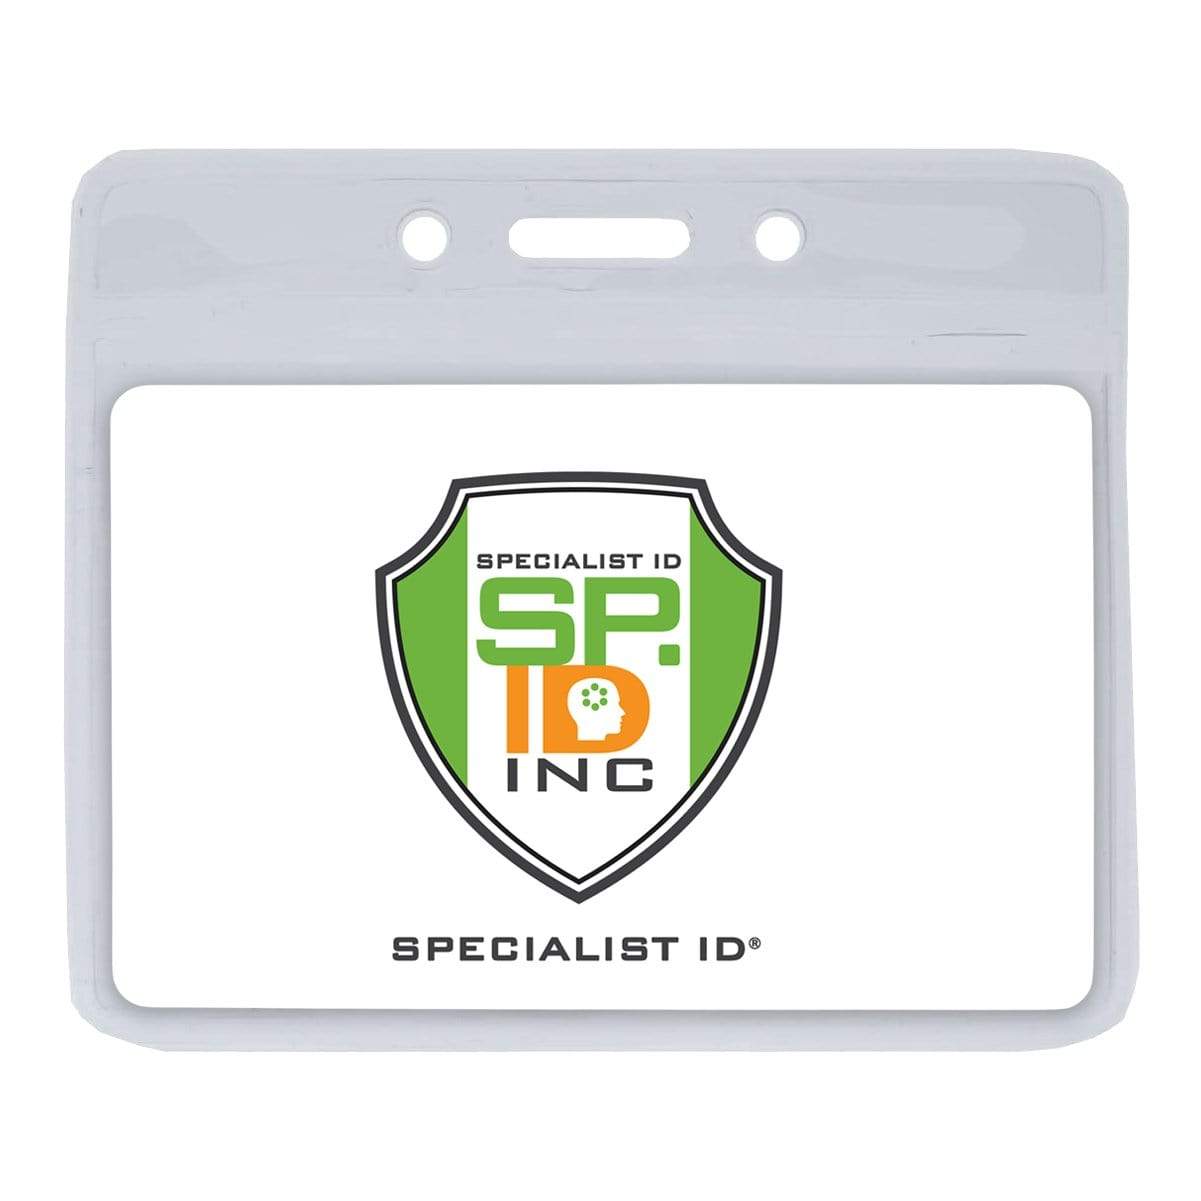 Discover why our - Specialist ID, SpecialistID.com